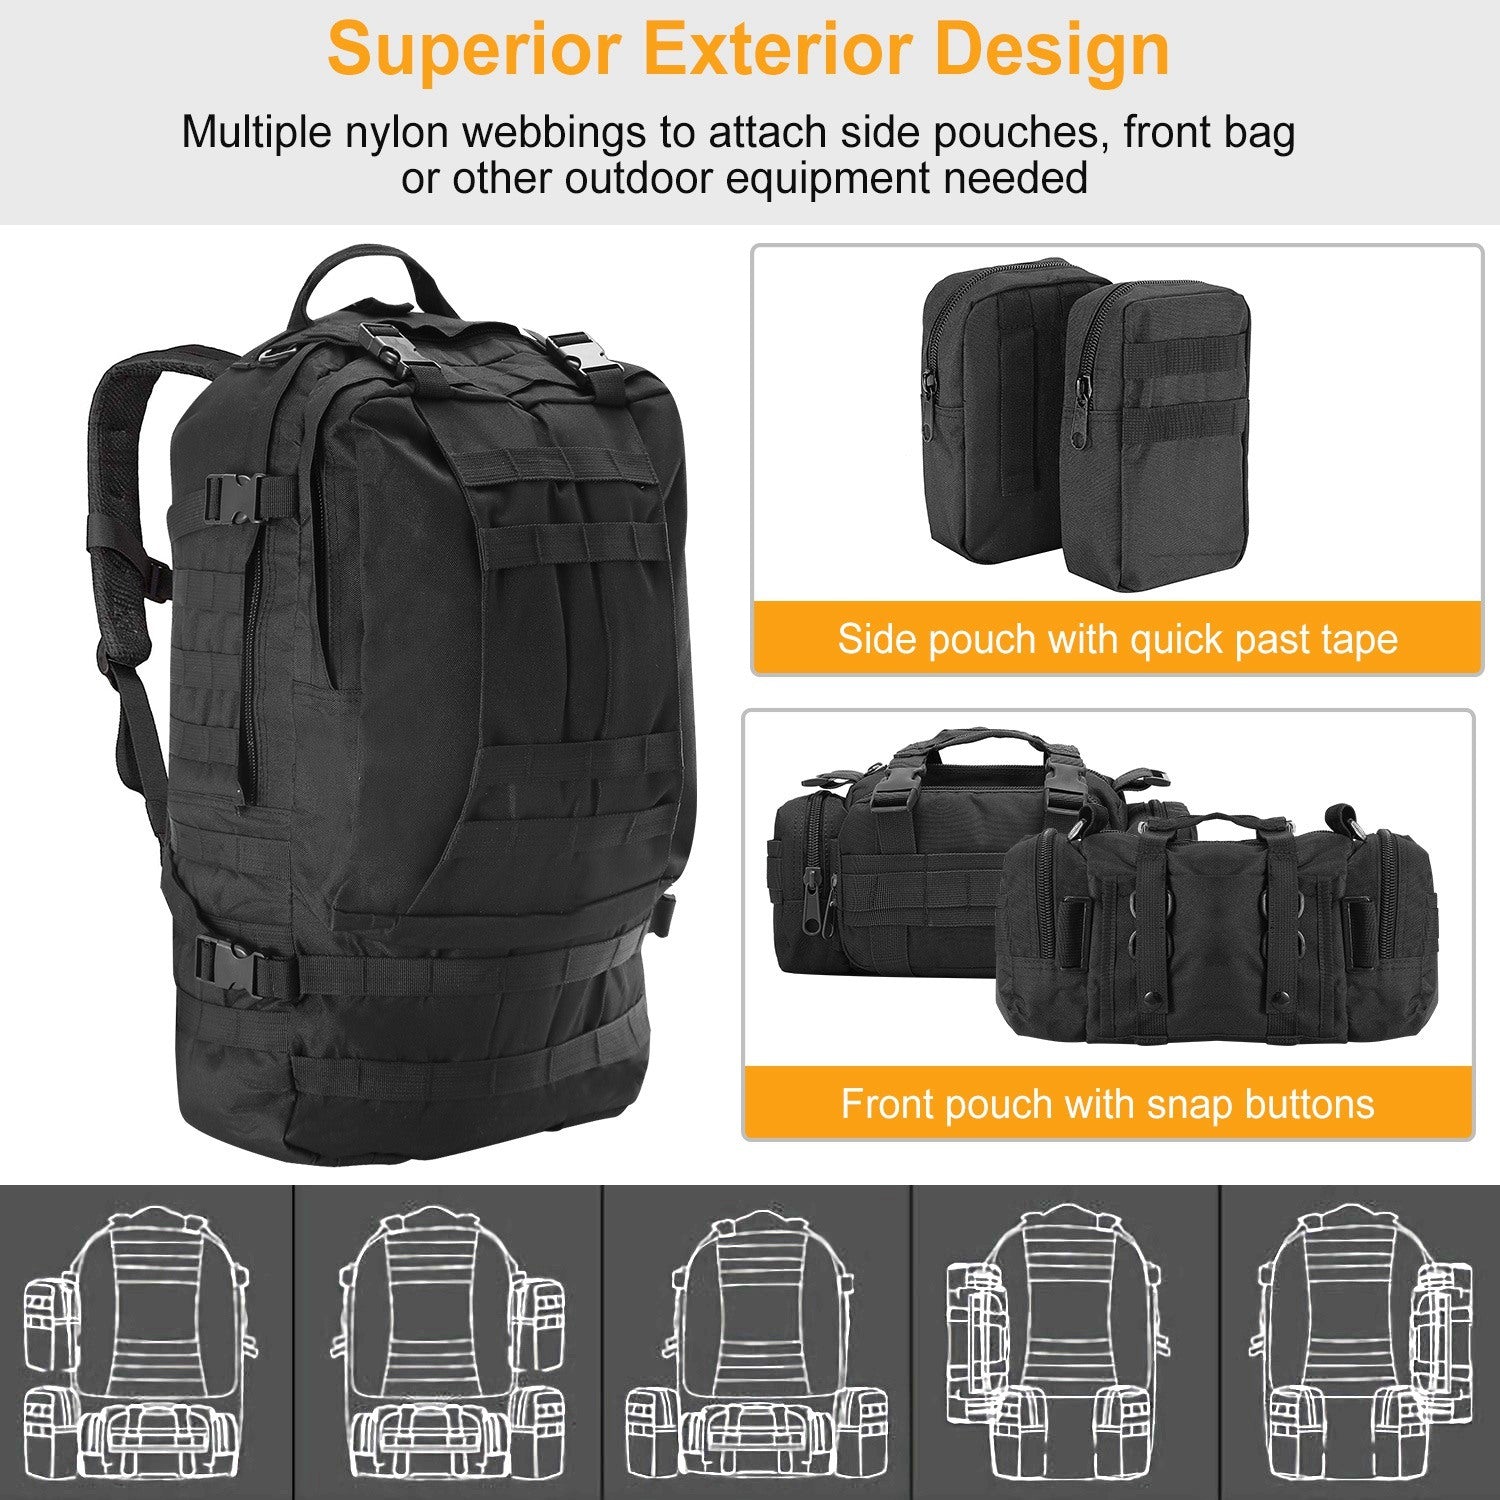 A 56L Military Tactical Backpack Rucksacks Army Assault Pack Combat Backpack Pouch with durable construction on a white background.